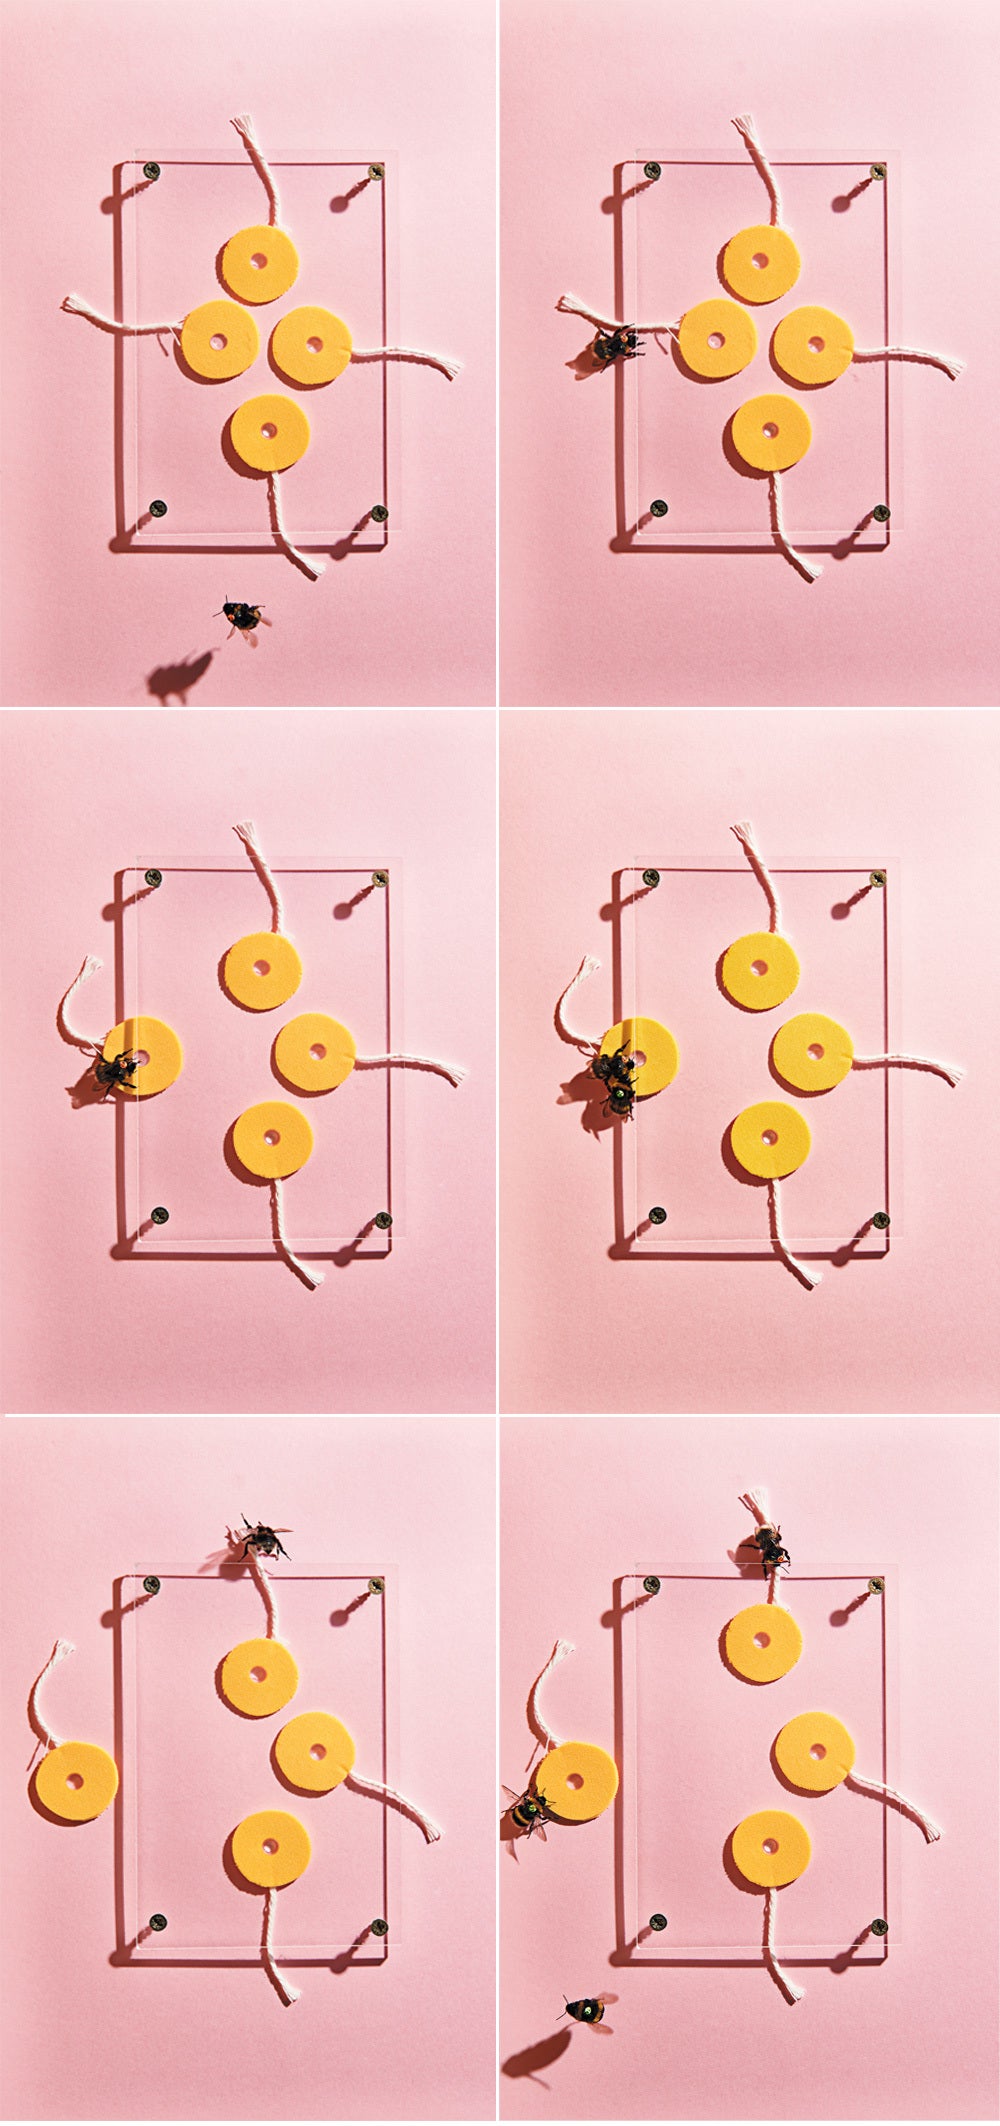 Images of bees pulling string.